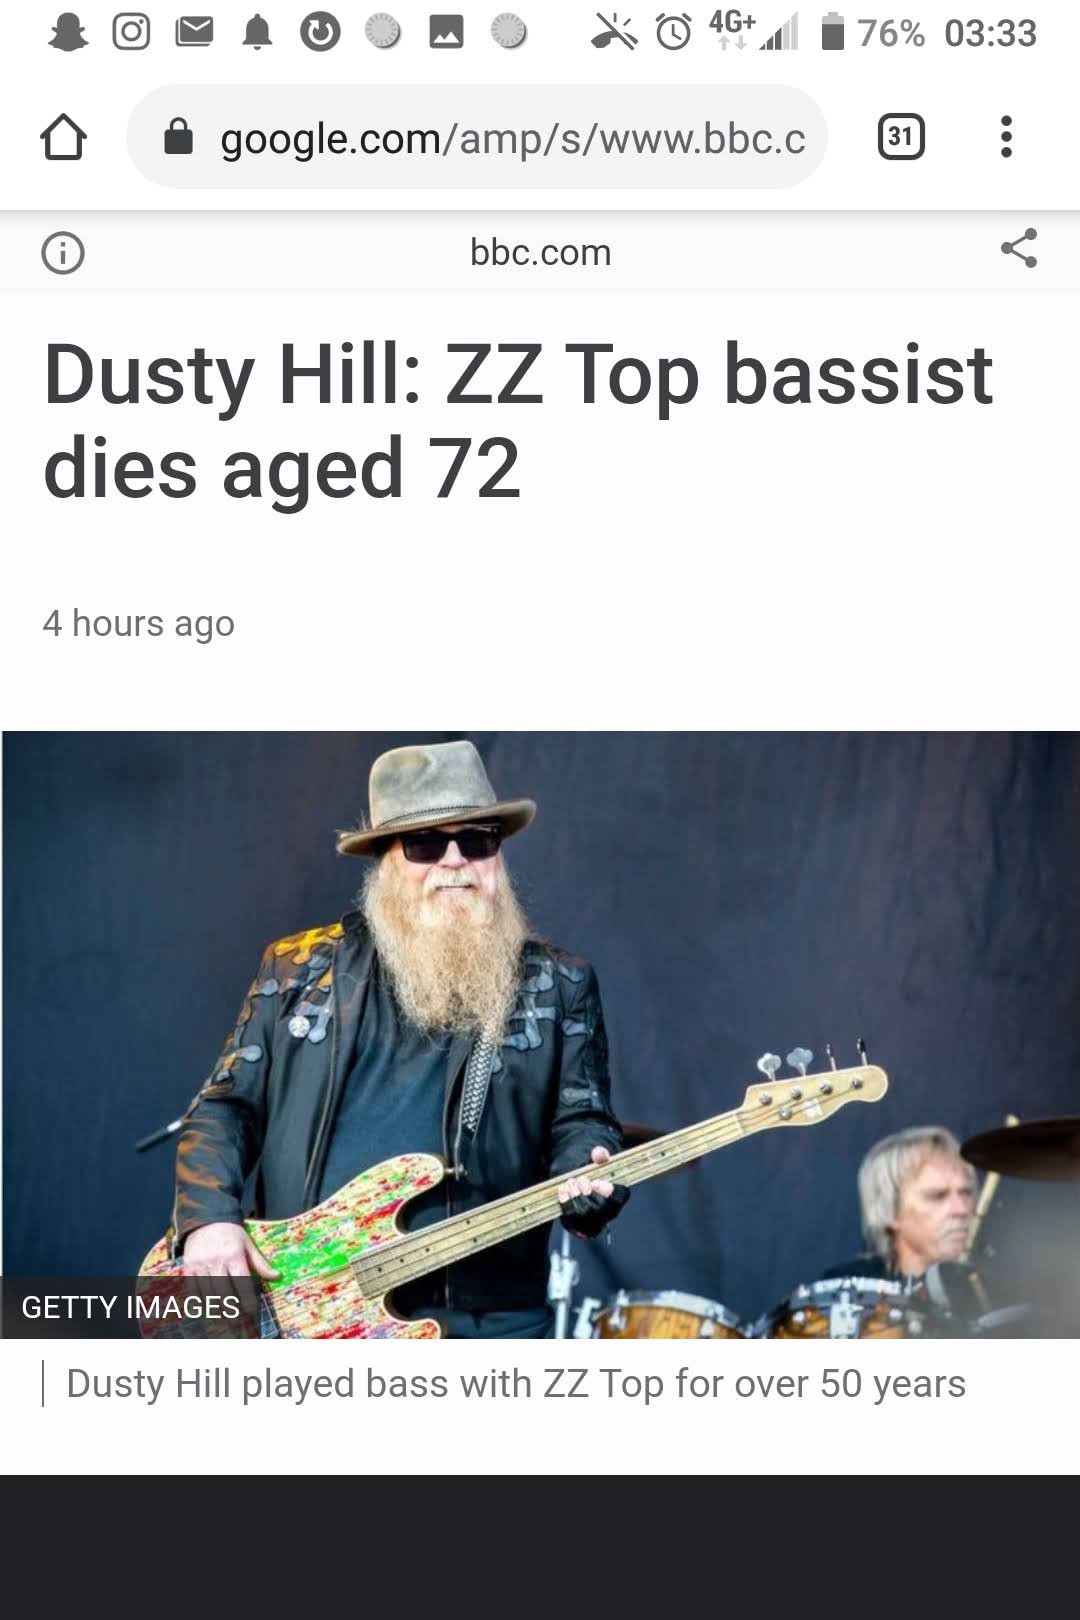 Screenshot of a BBC article that I came across. The article is titled: Dusty Hill: ZZ Top bassist dies aged 72. Between the time I played the song and saw the Reddit post, its’ singer died